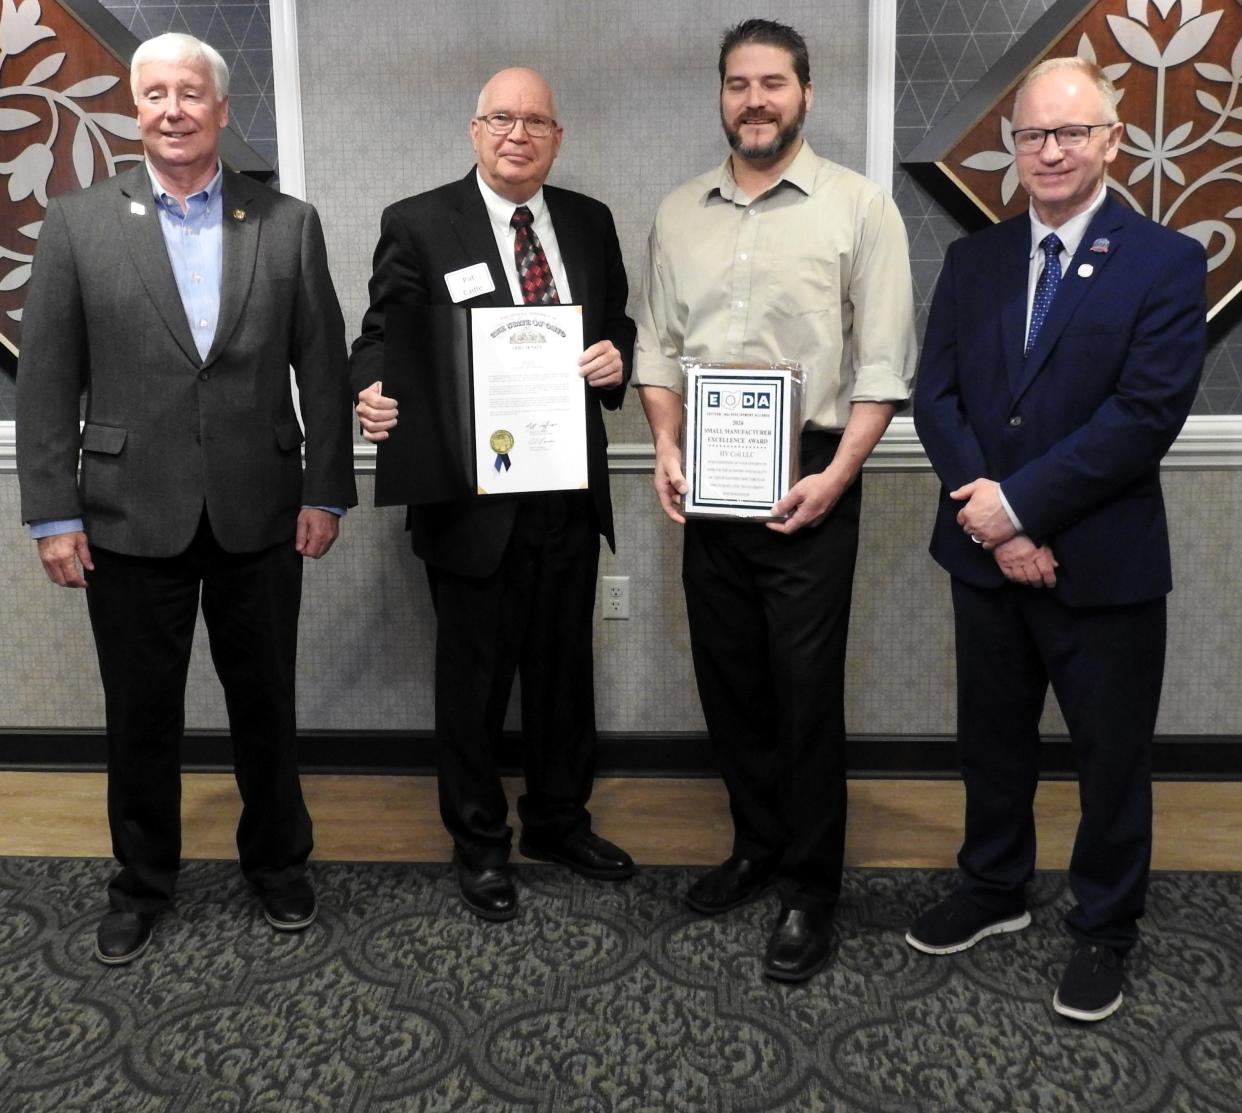 State Sen. Al Landis, Mayor Pat Cadle of Newcomerstown, Caleb Munholand of HV Coil and Tuscarawas County Commissioner Chris Abbuhl with awards presented by Landis and the Eastern Ohio Development Alliance recognizing HV Coil for its excellence as a small manufacturer in the region.